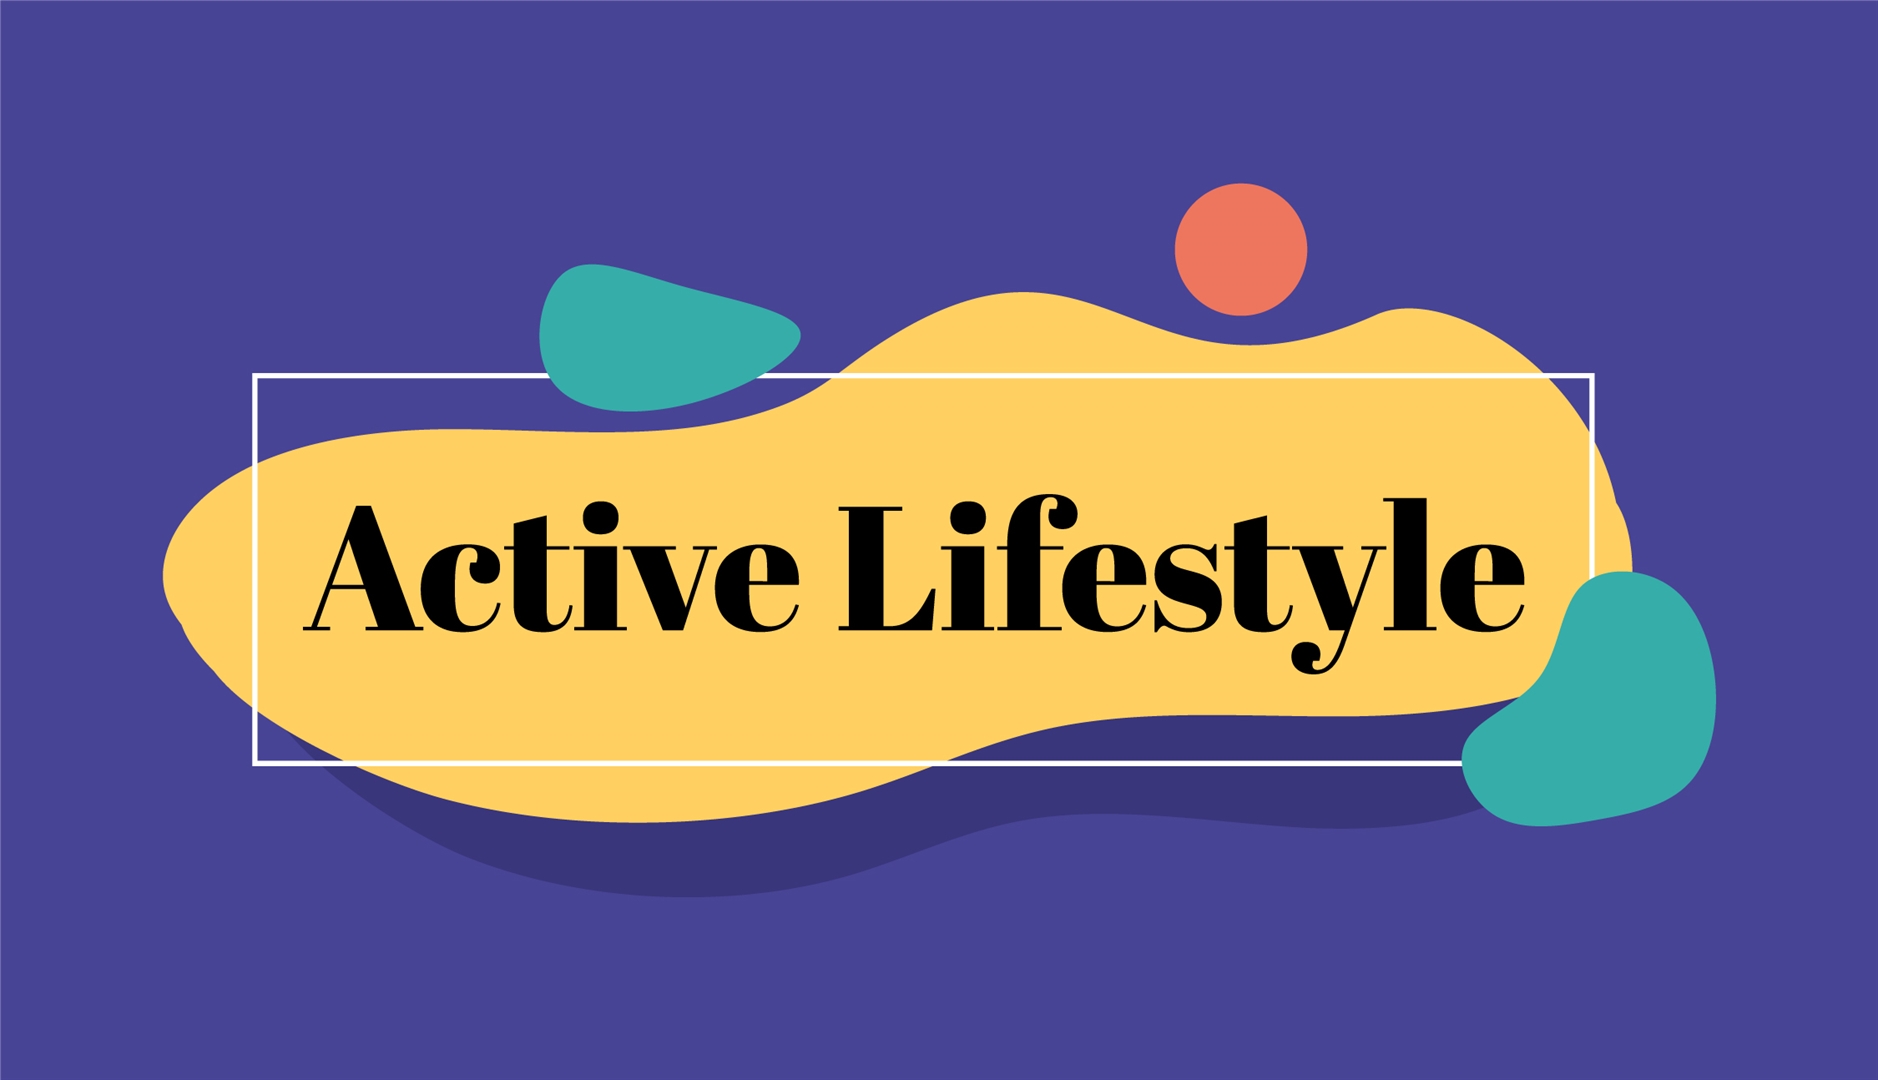 The Active Lifestyle Programme offers a wide range of feel-good Recreational sport sessions to help you get active, meet new friends and put a smile on your face!  For those new to physical activity and those that want to reignite their love for sport, check out our low commitment pay-as-you-go sessions.